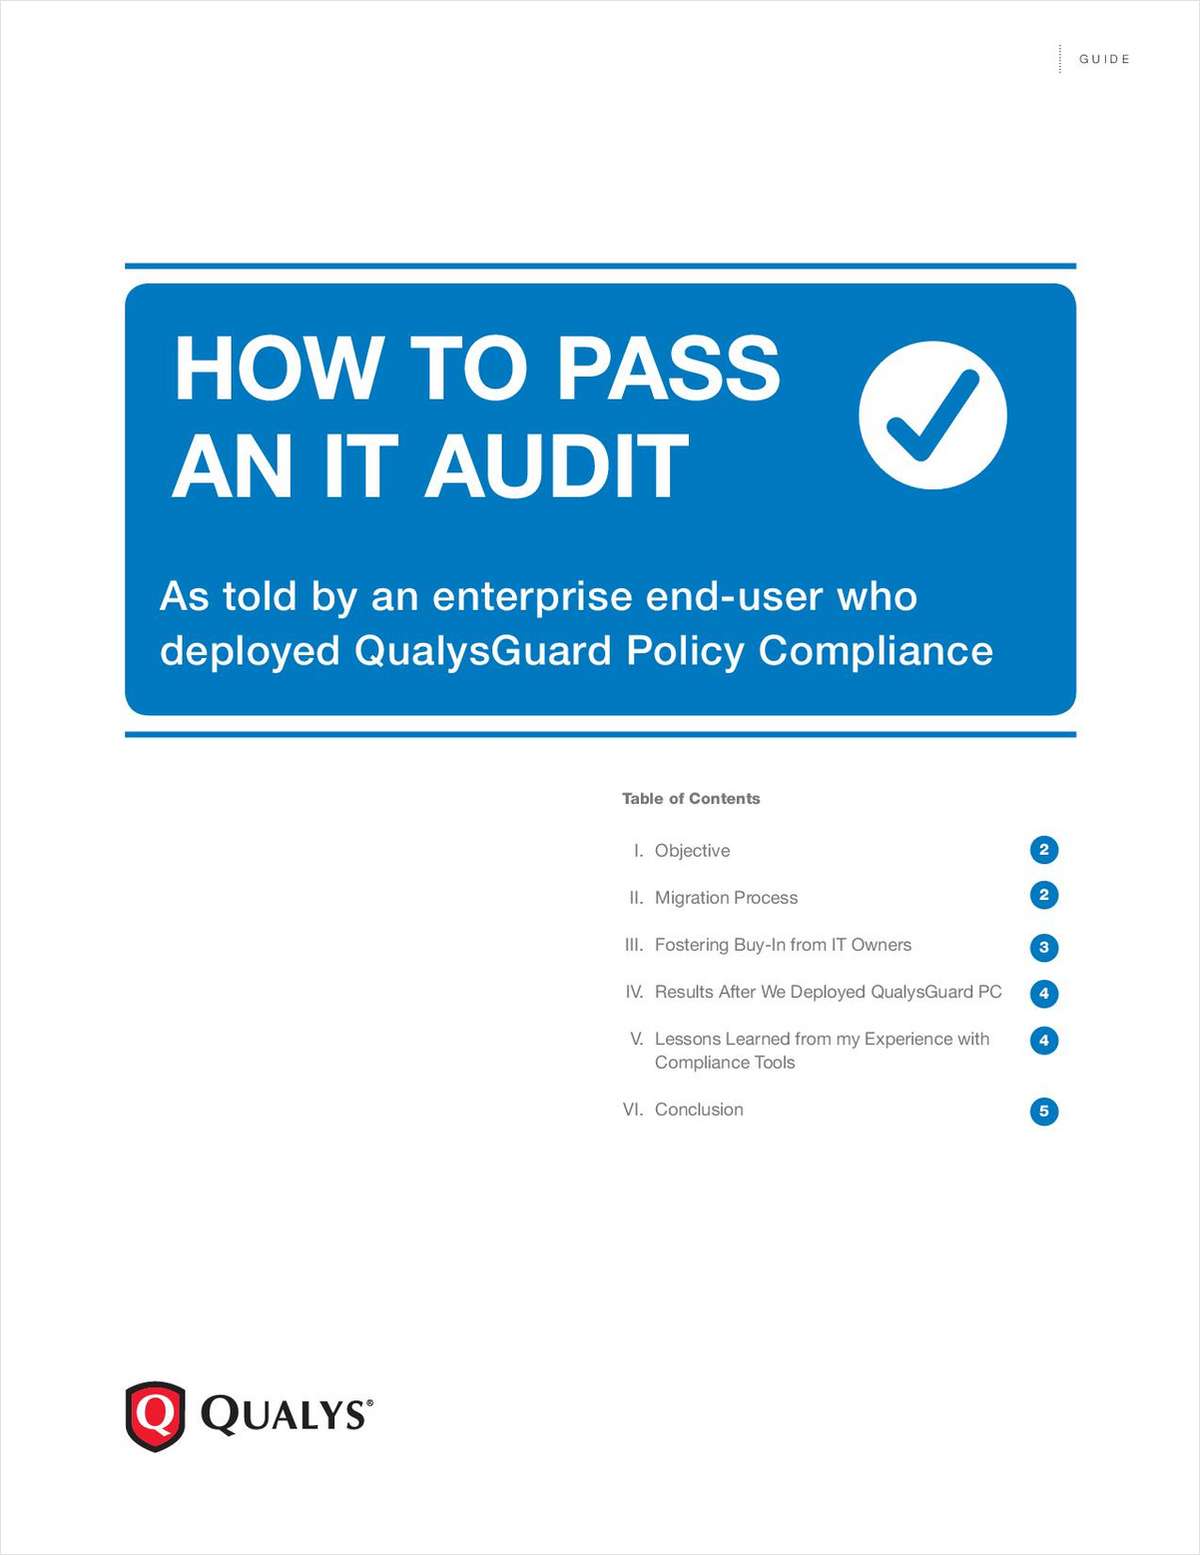 How to Pass an IT Audit